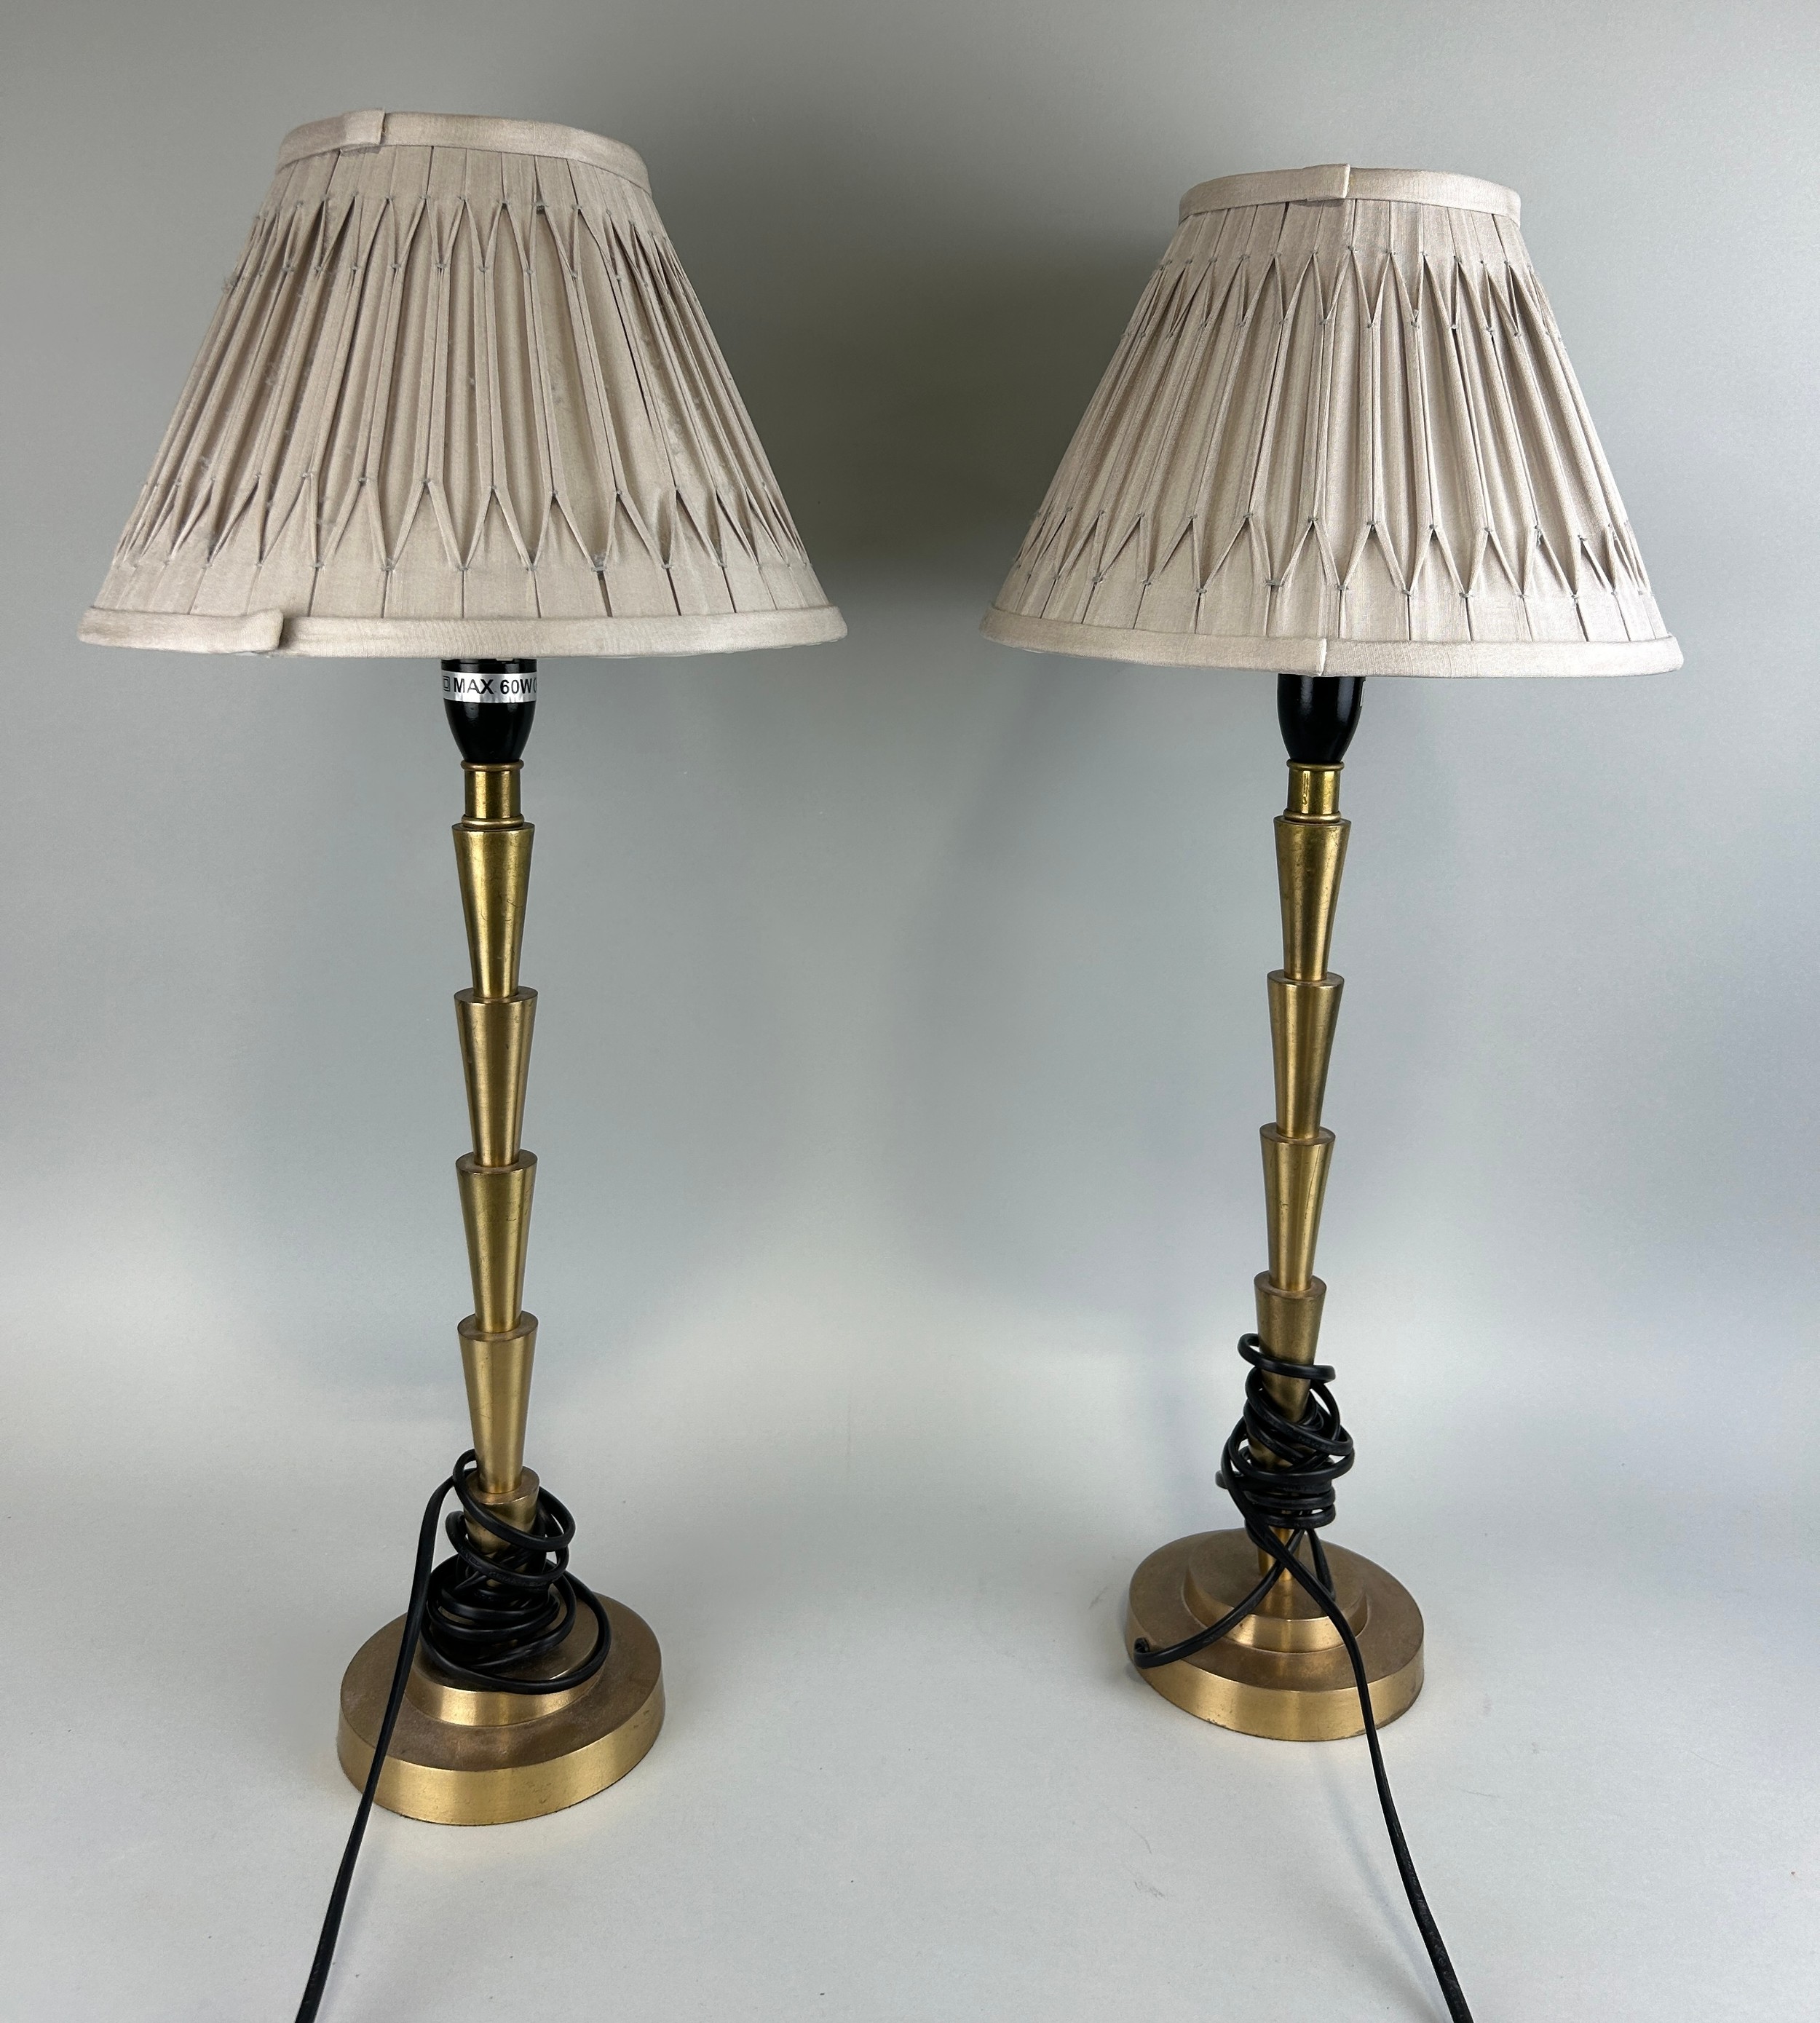 A PAIR OF LAURA ASHLEY TABLE LAMPS AND SHADES